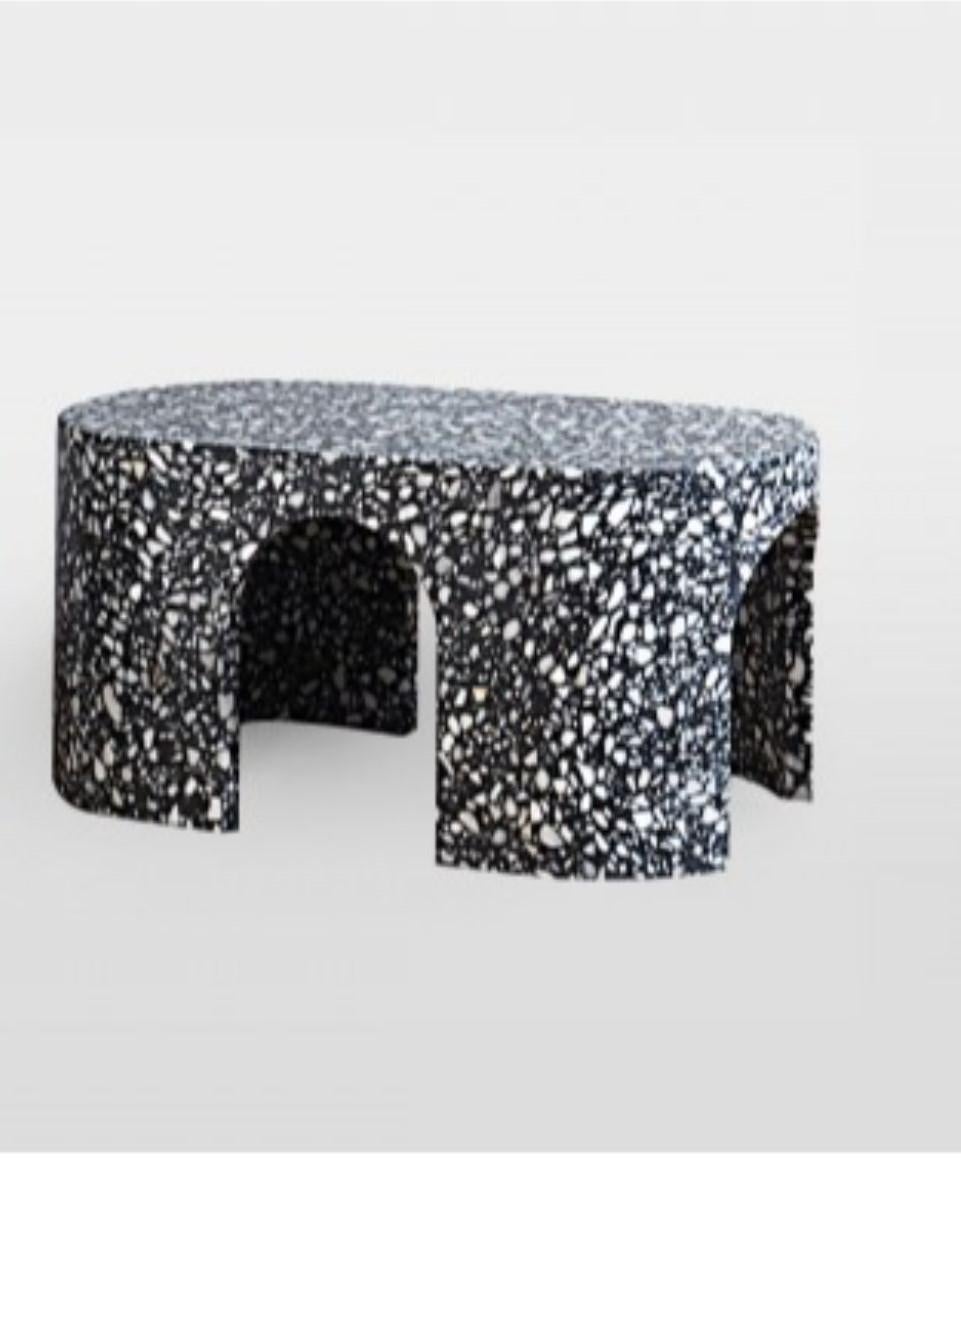 Loggia Terrazzo Coffee Table  by Matteo Leorato
Dimensions: D 80 x W 40 x H 37 cm
Materials: Terrazzo (Marble and Resin). 
Also available in White. Please contact us for more information. 


An essential element with a strong stylistic impact that